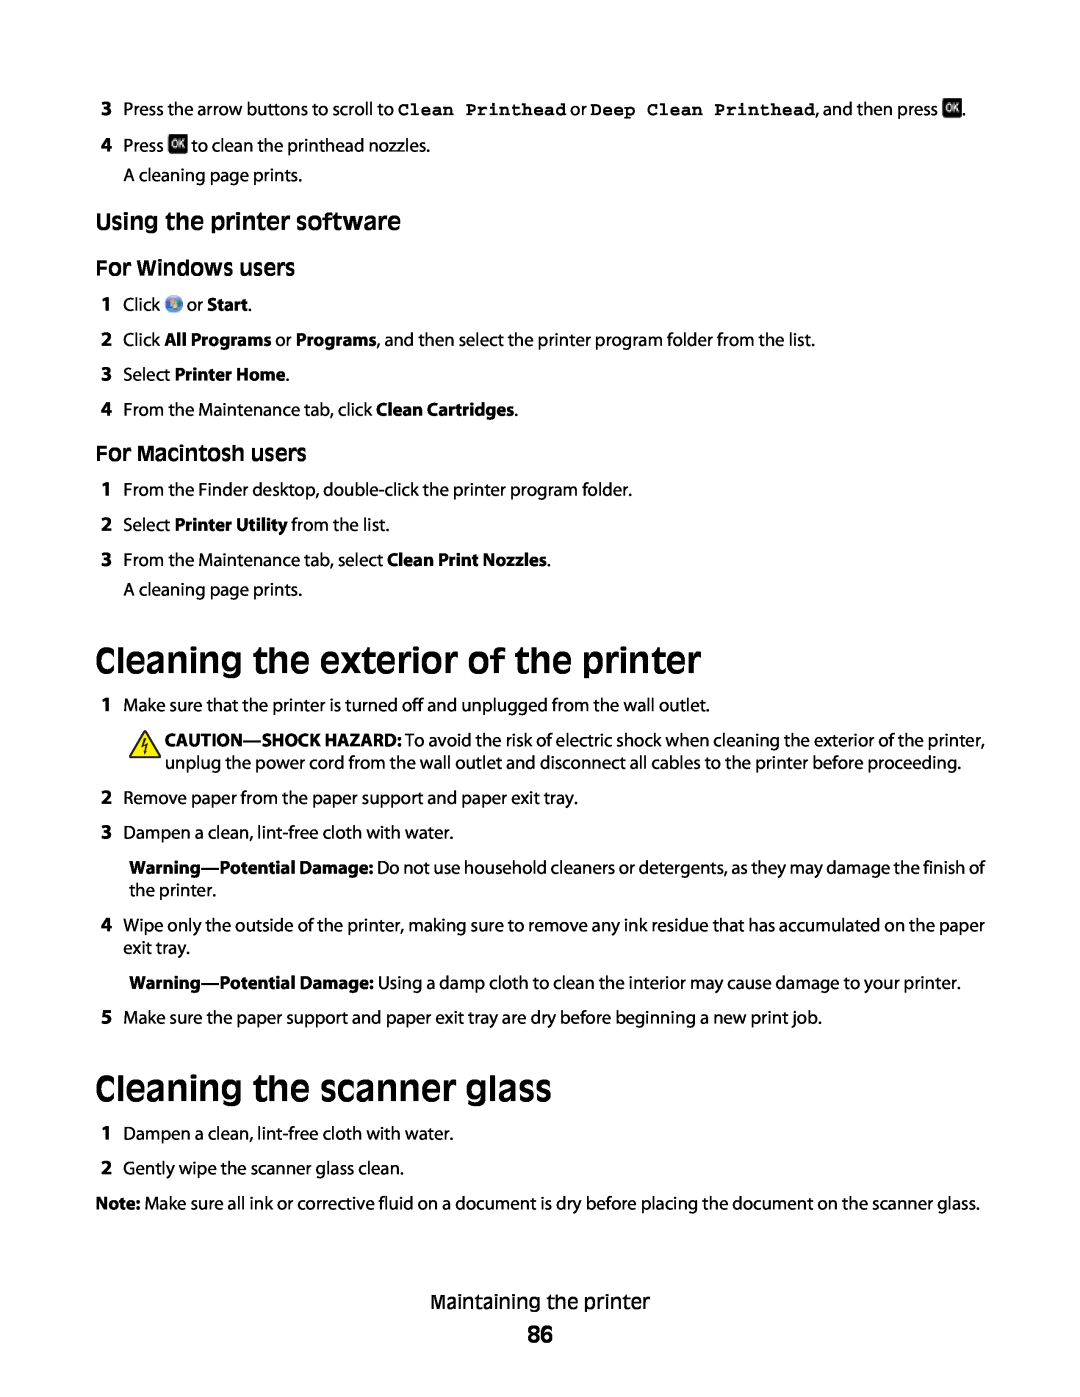 Lexmark 101, 10E manual Cleaning the exterior of the printer, Cleaning the scanner glass, Using the printer software 